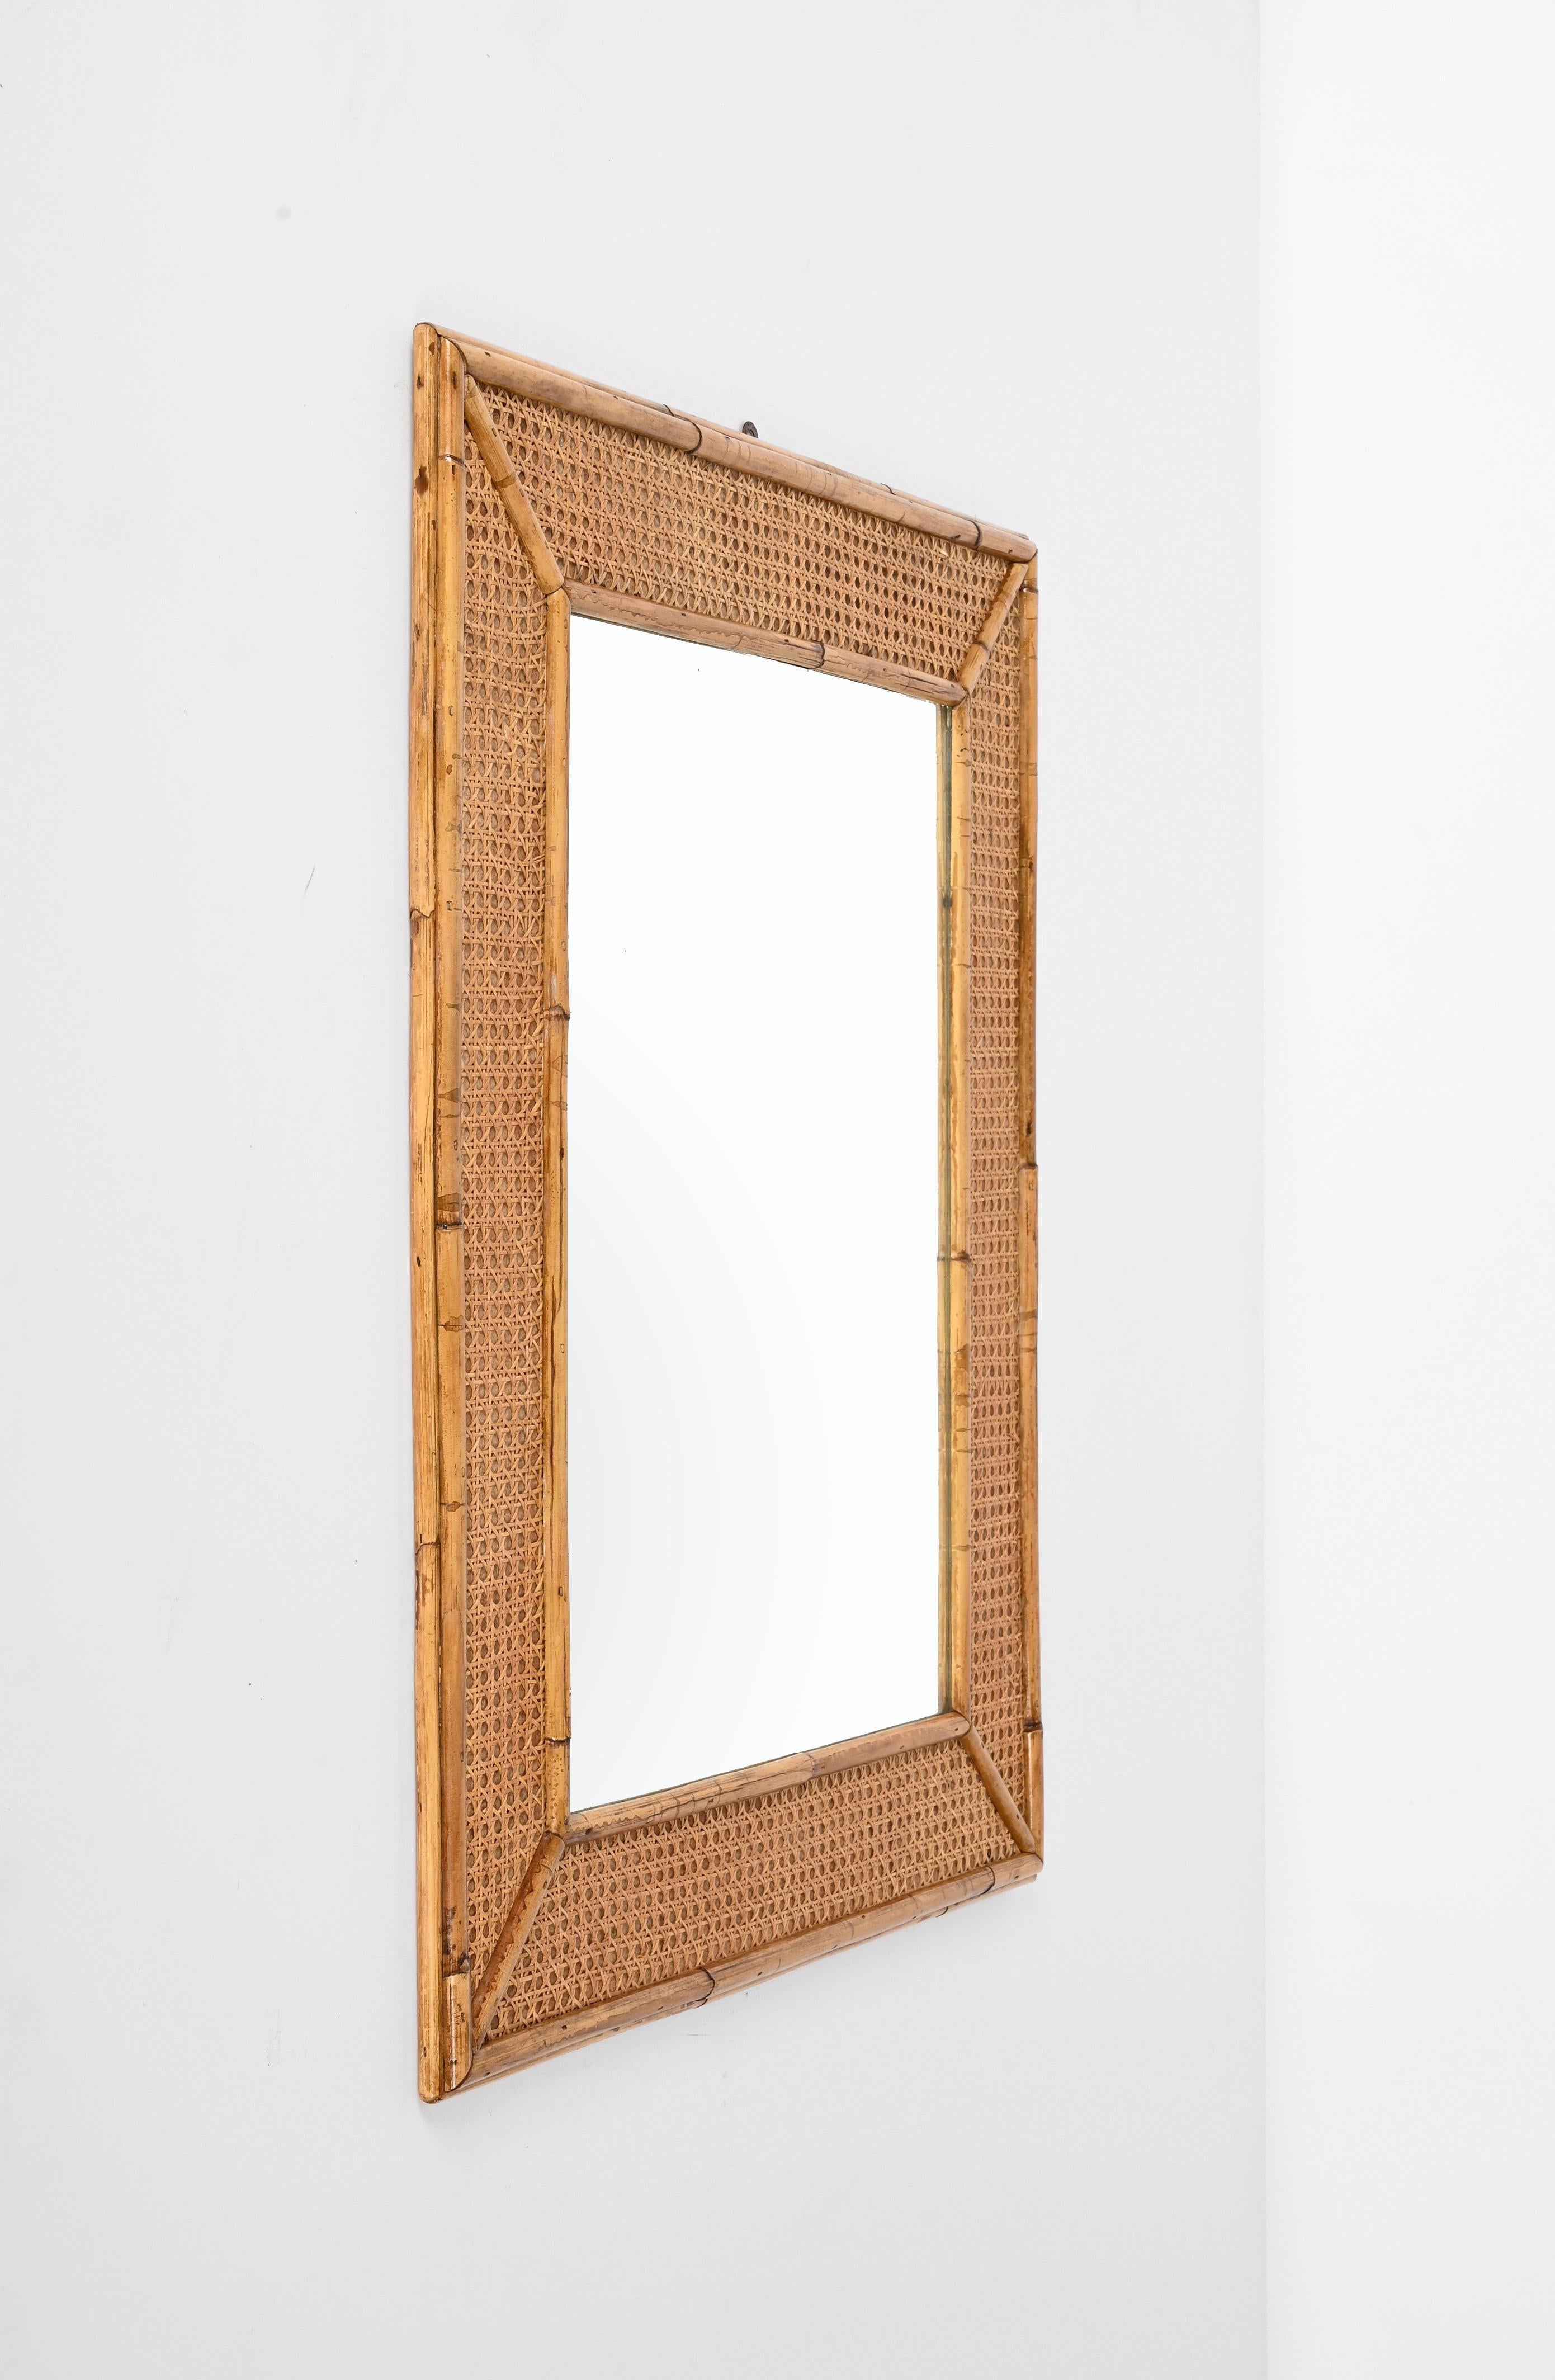 20th Century Midcentury Rectangular Italian Mirror with Bamboo and Vienna Straw Frame, 1970s For Sale